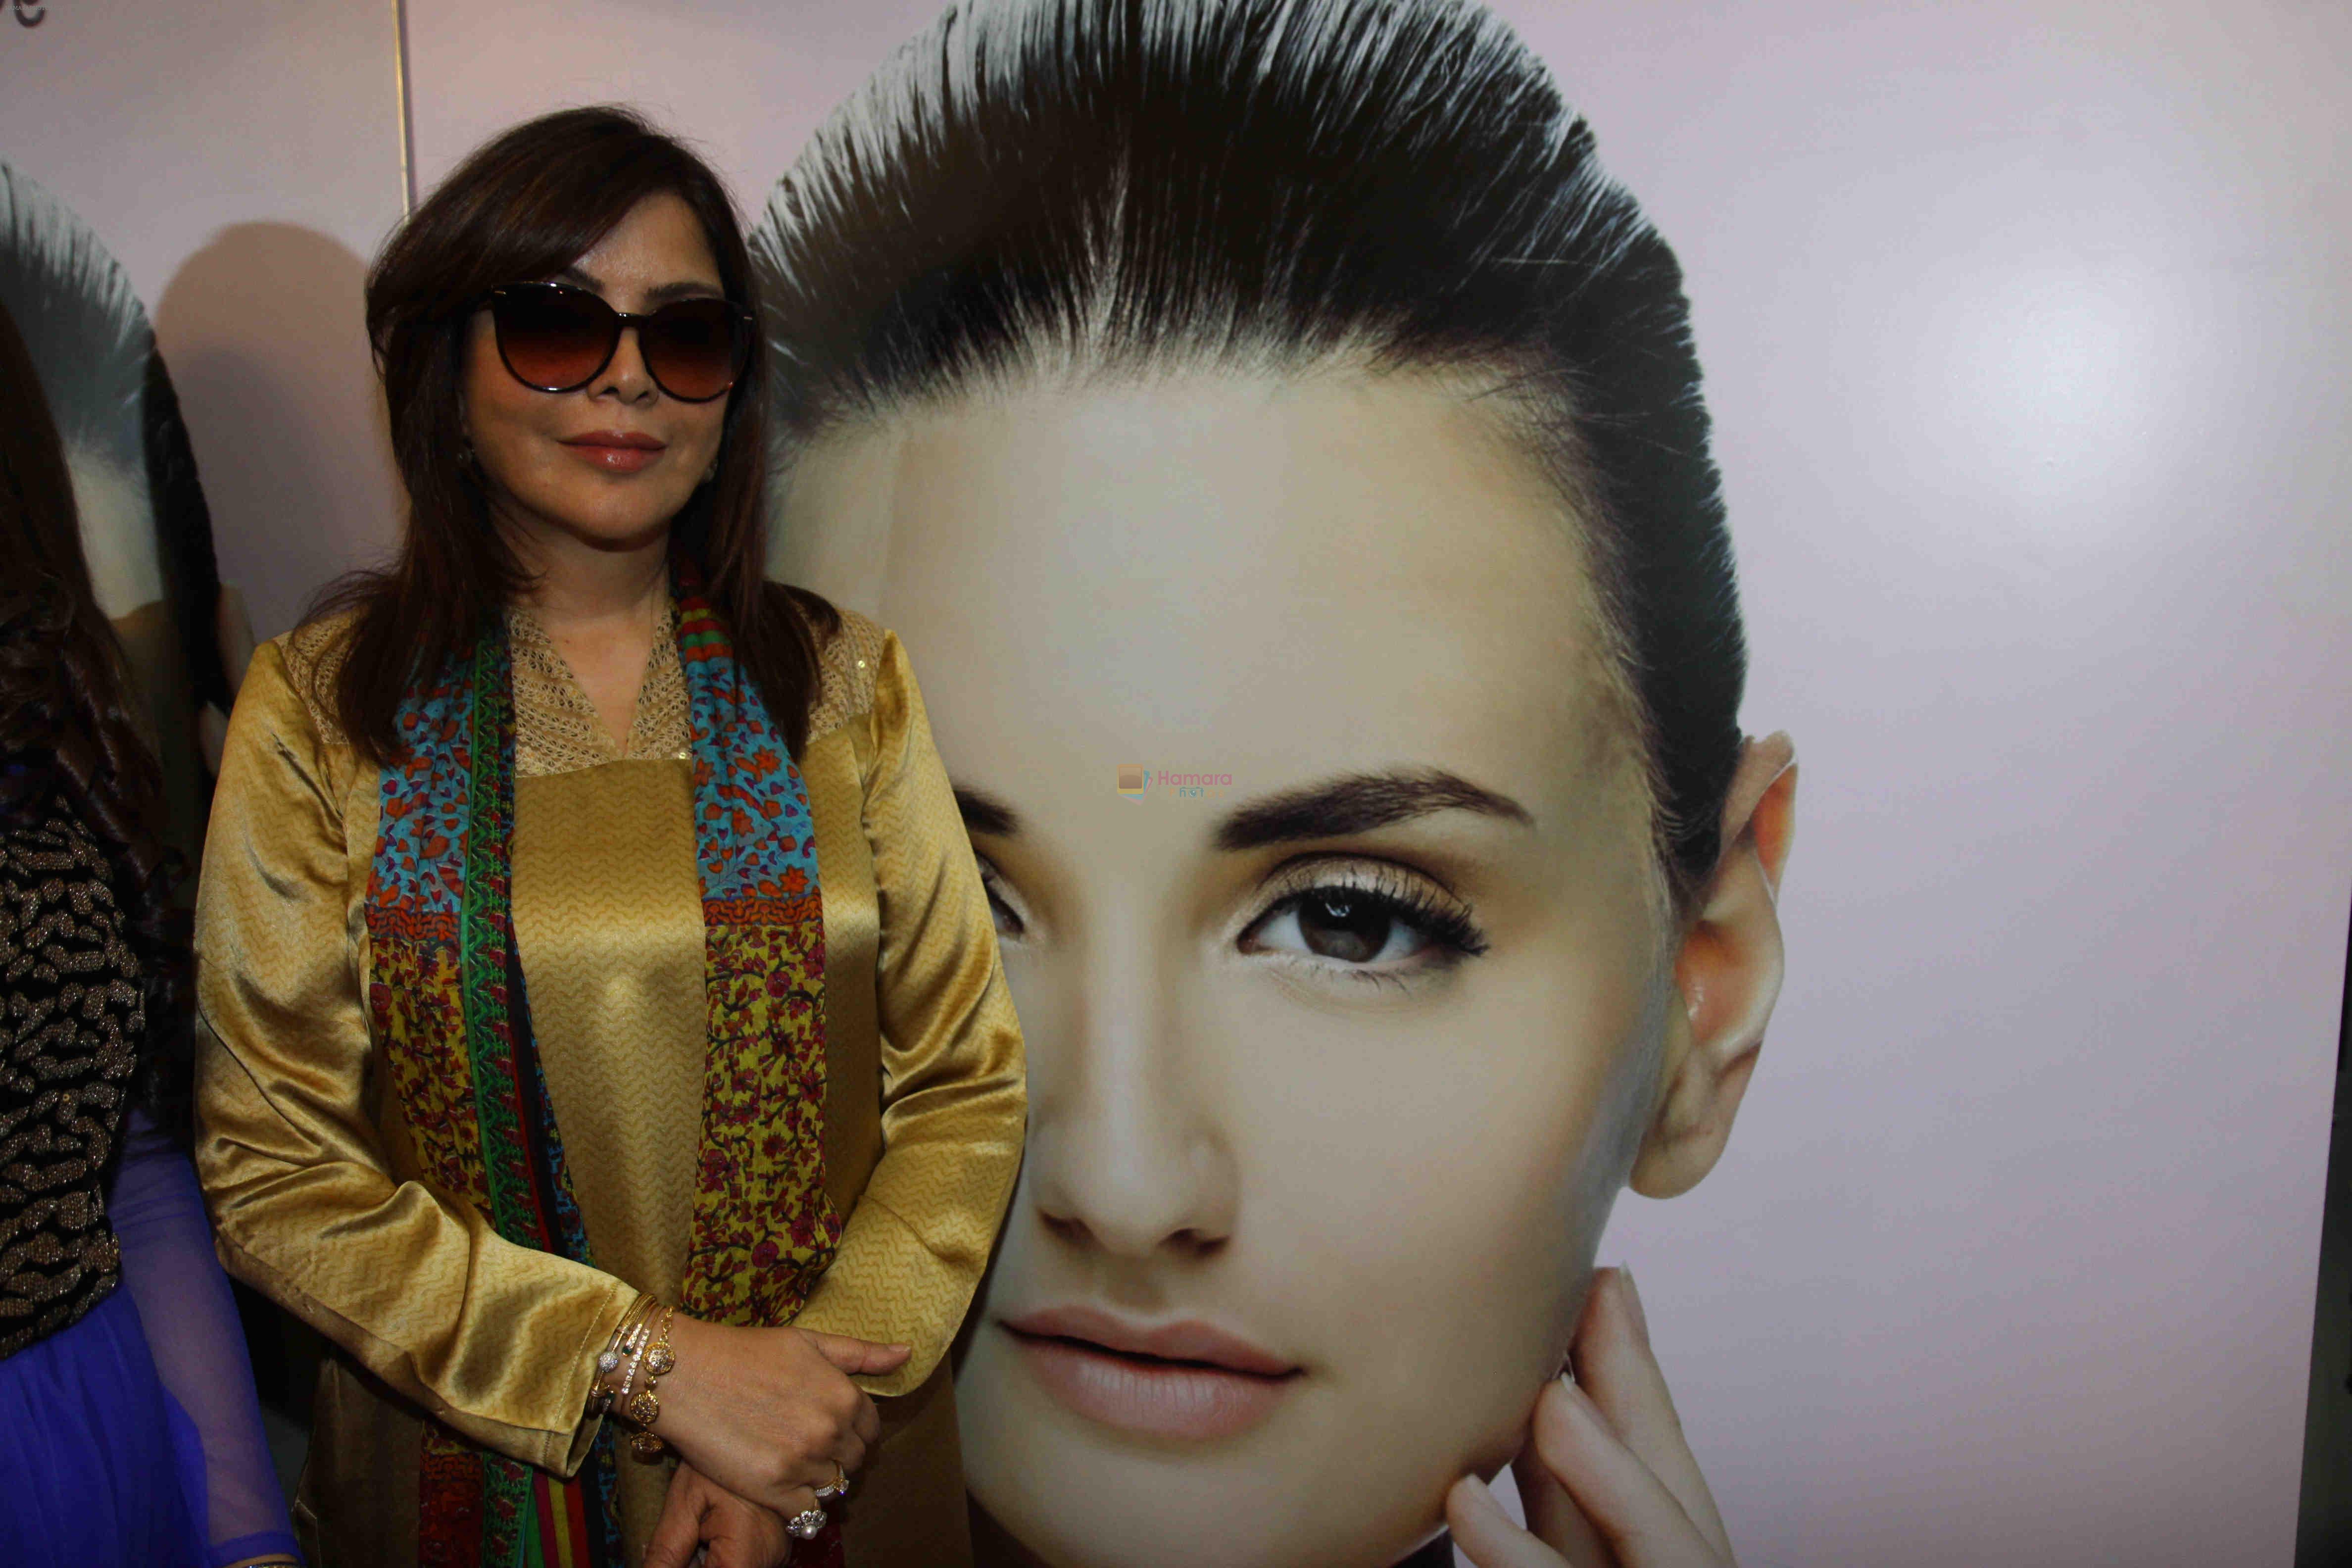 Zeenat Aman inaugurates Dr. Simple Aher's clinic Skin Lounge in Lokhandwala, Andheri West on 15th March 2015